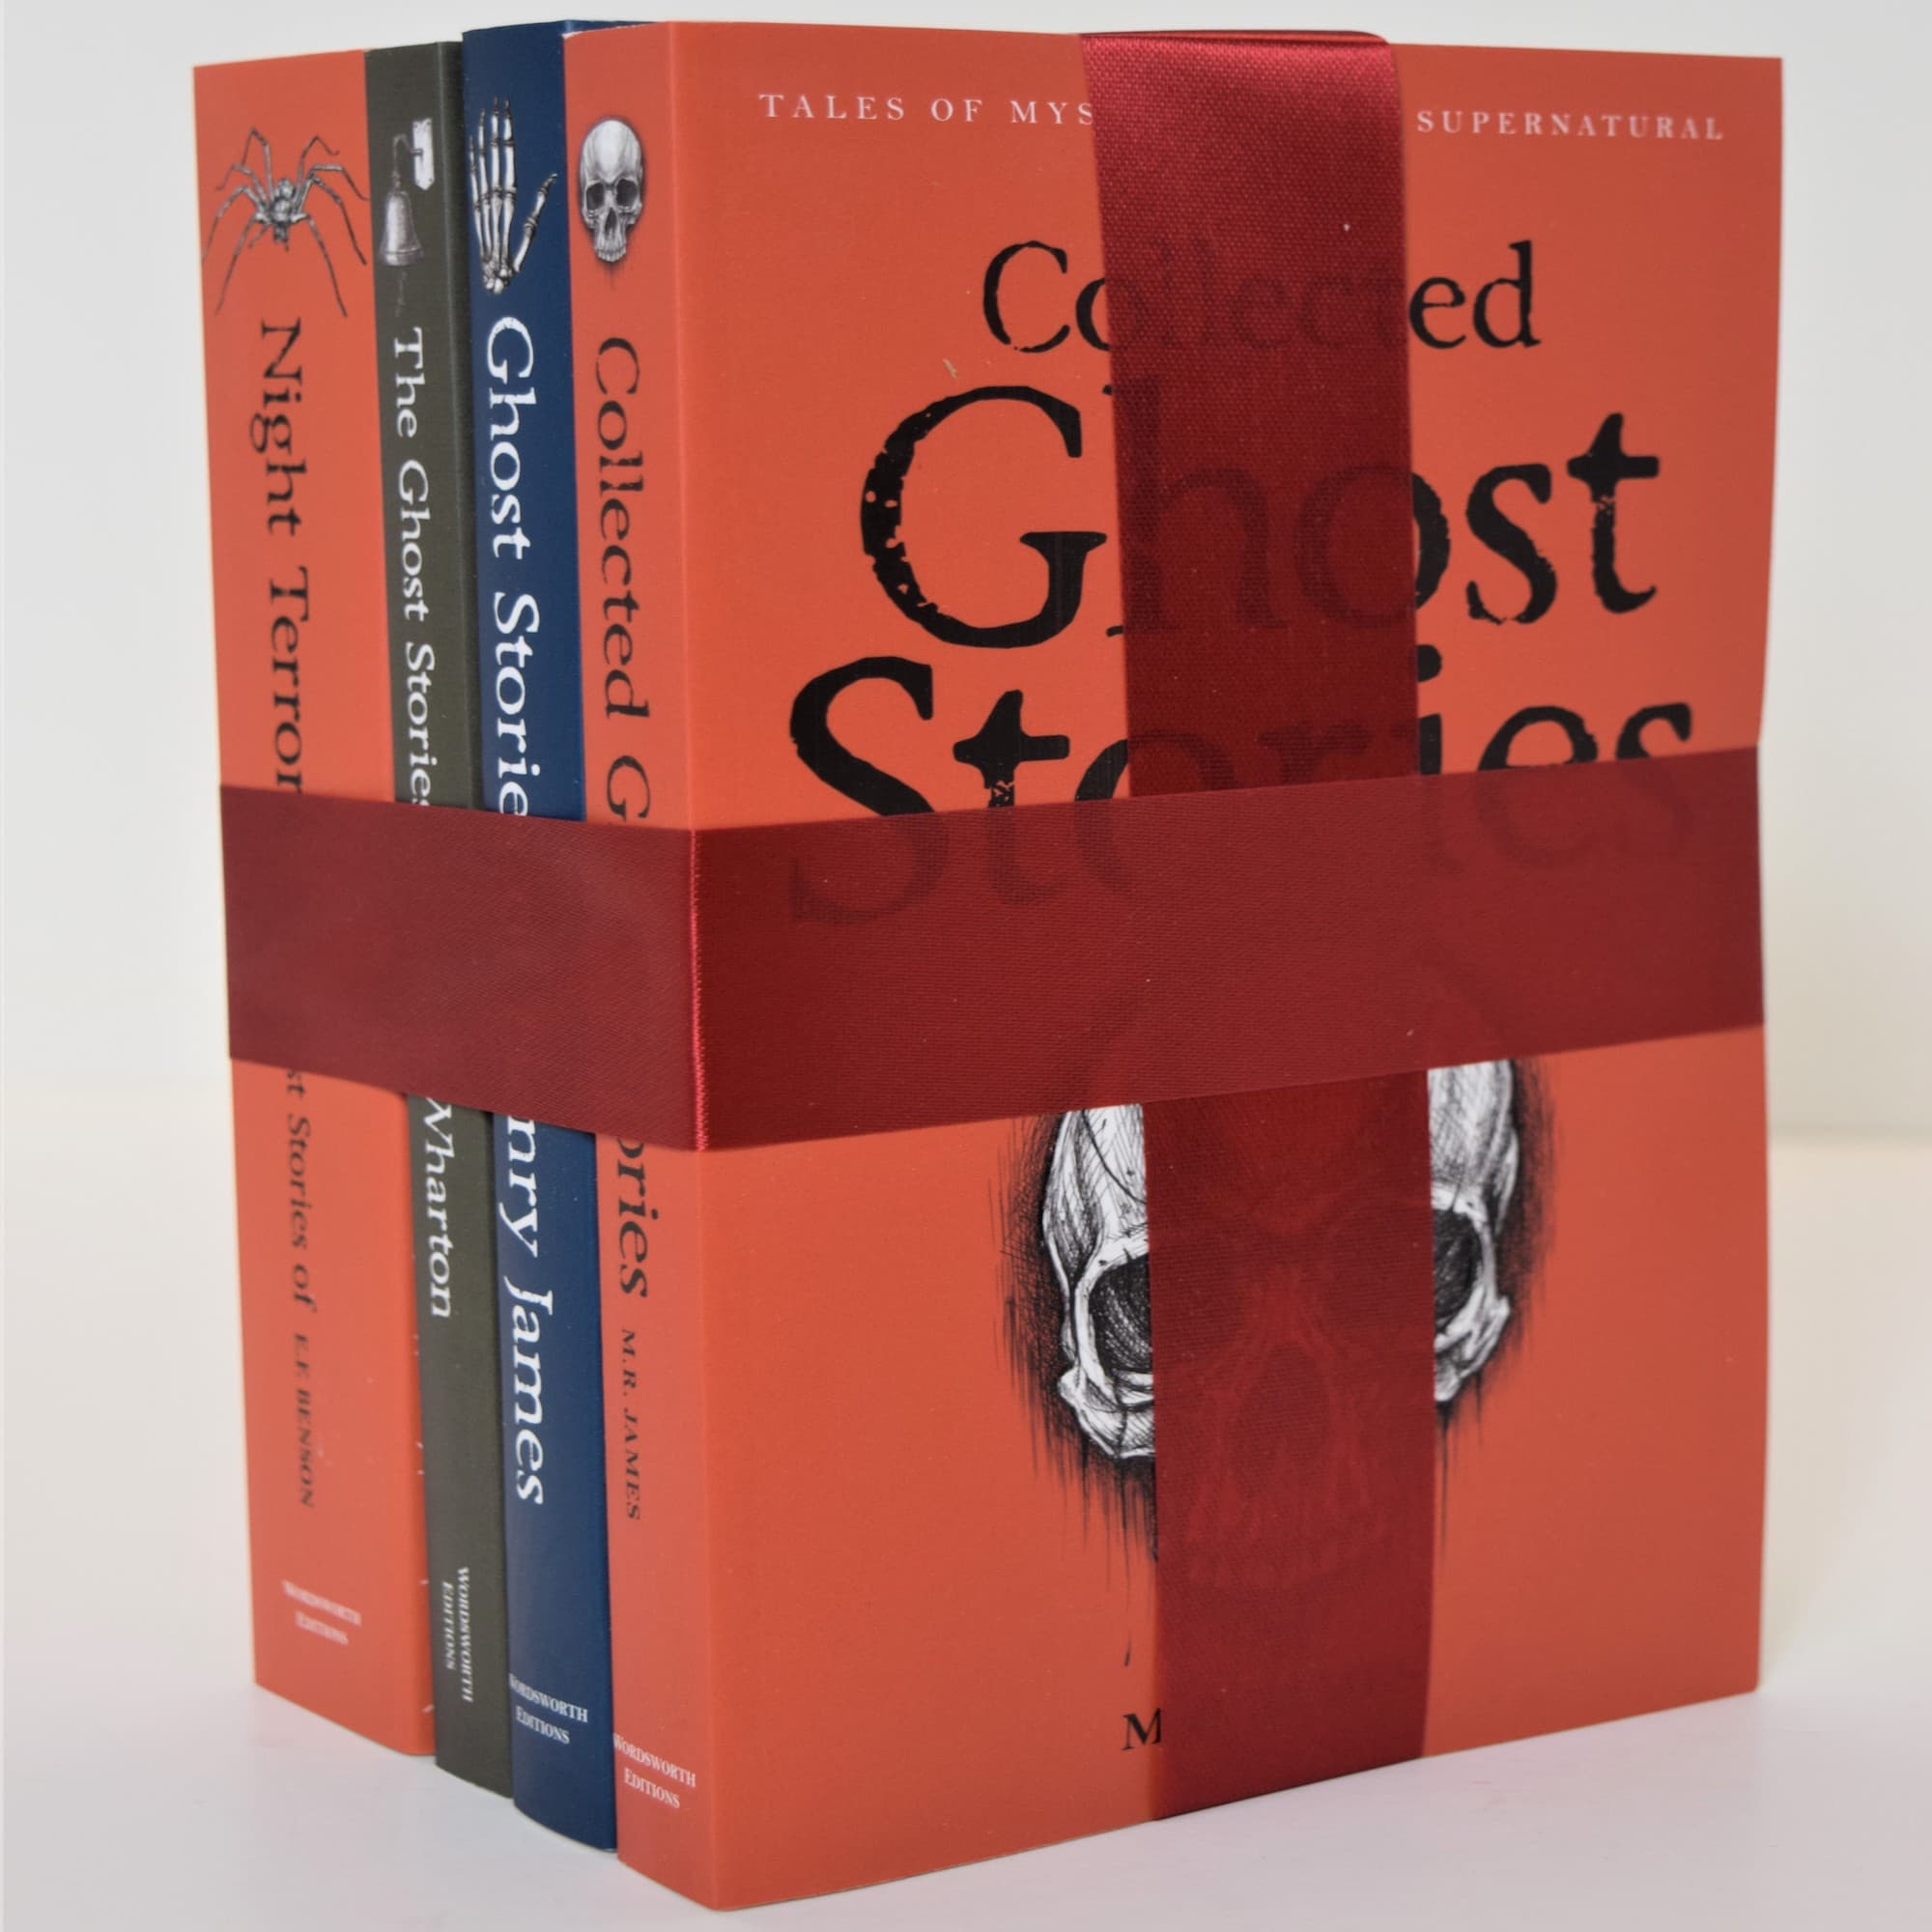 Classic Ghost Story Collection